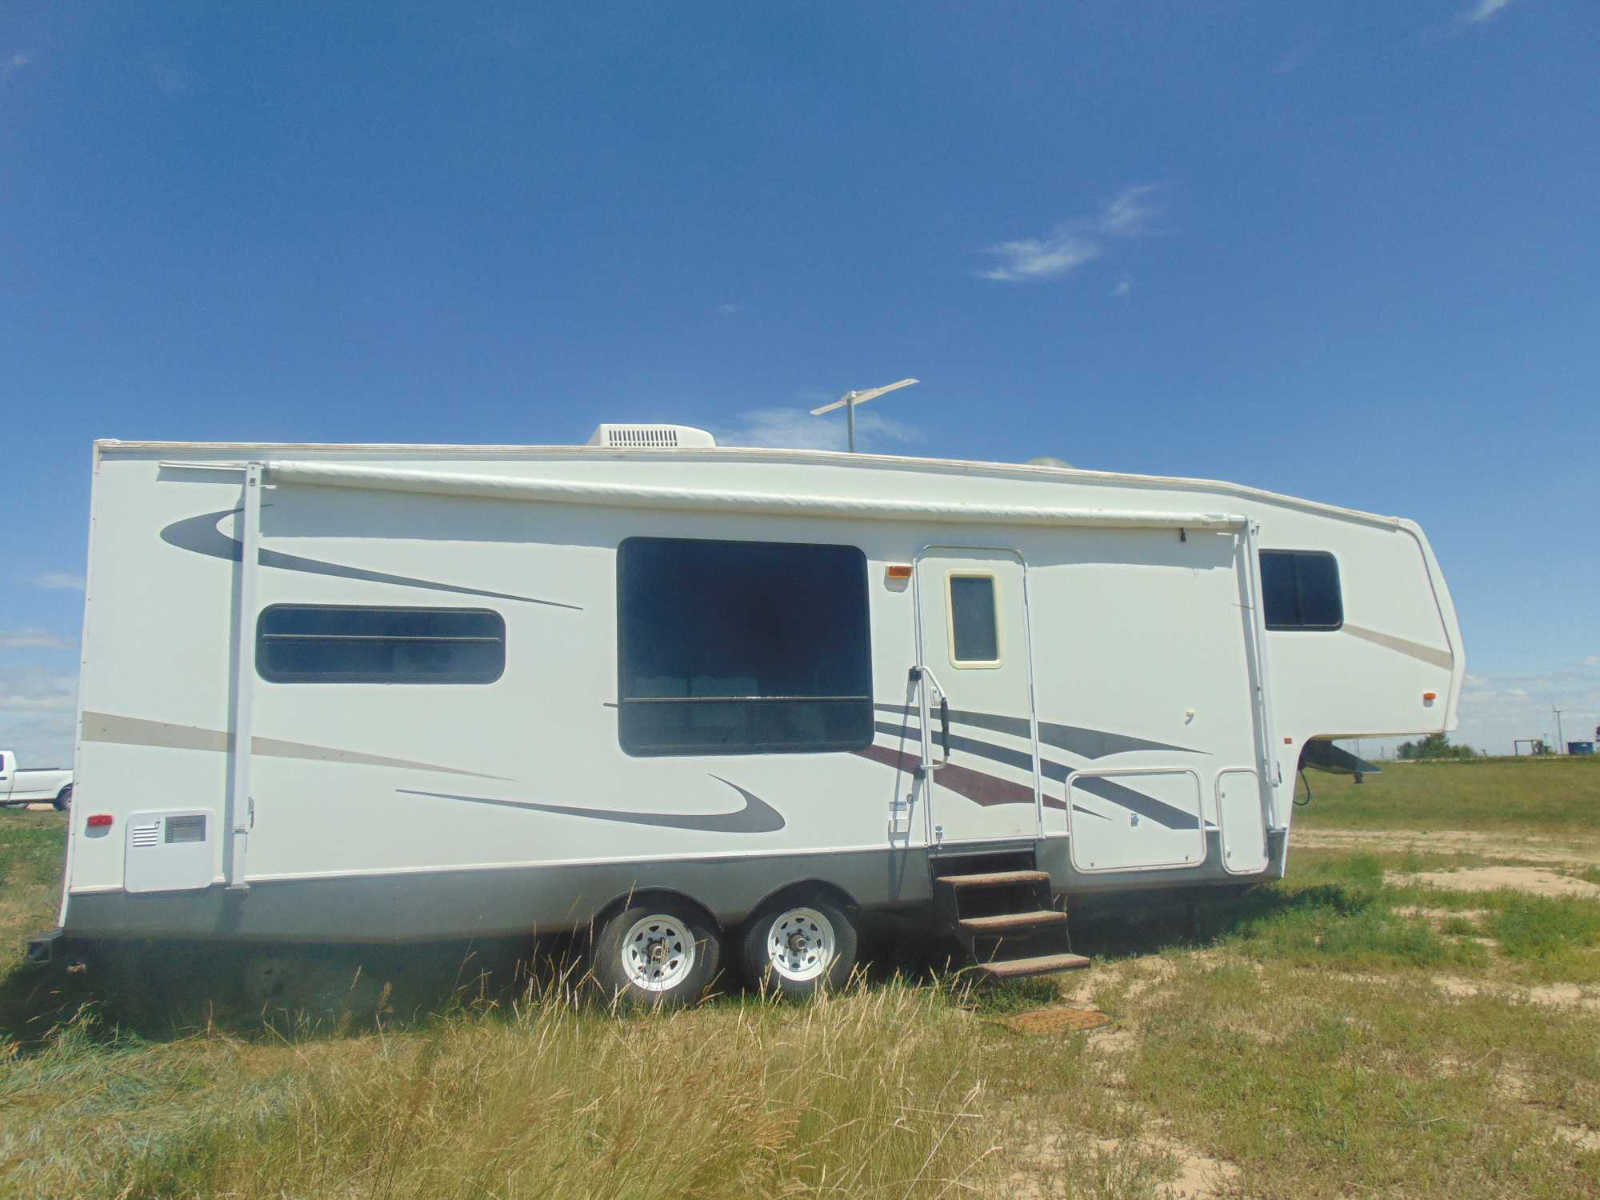 RV awning and entry exterior side view